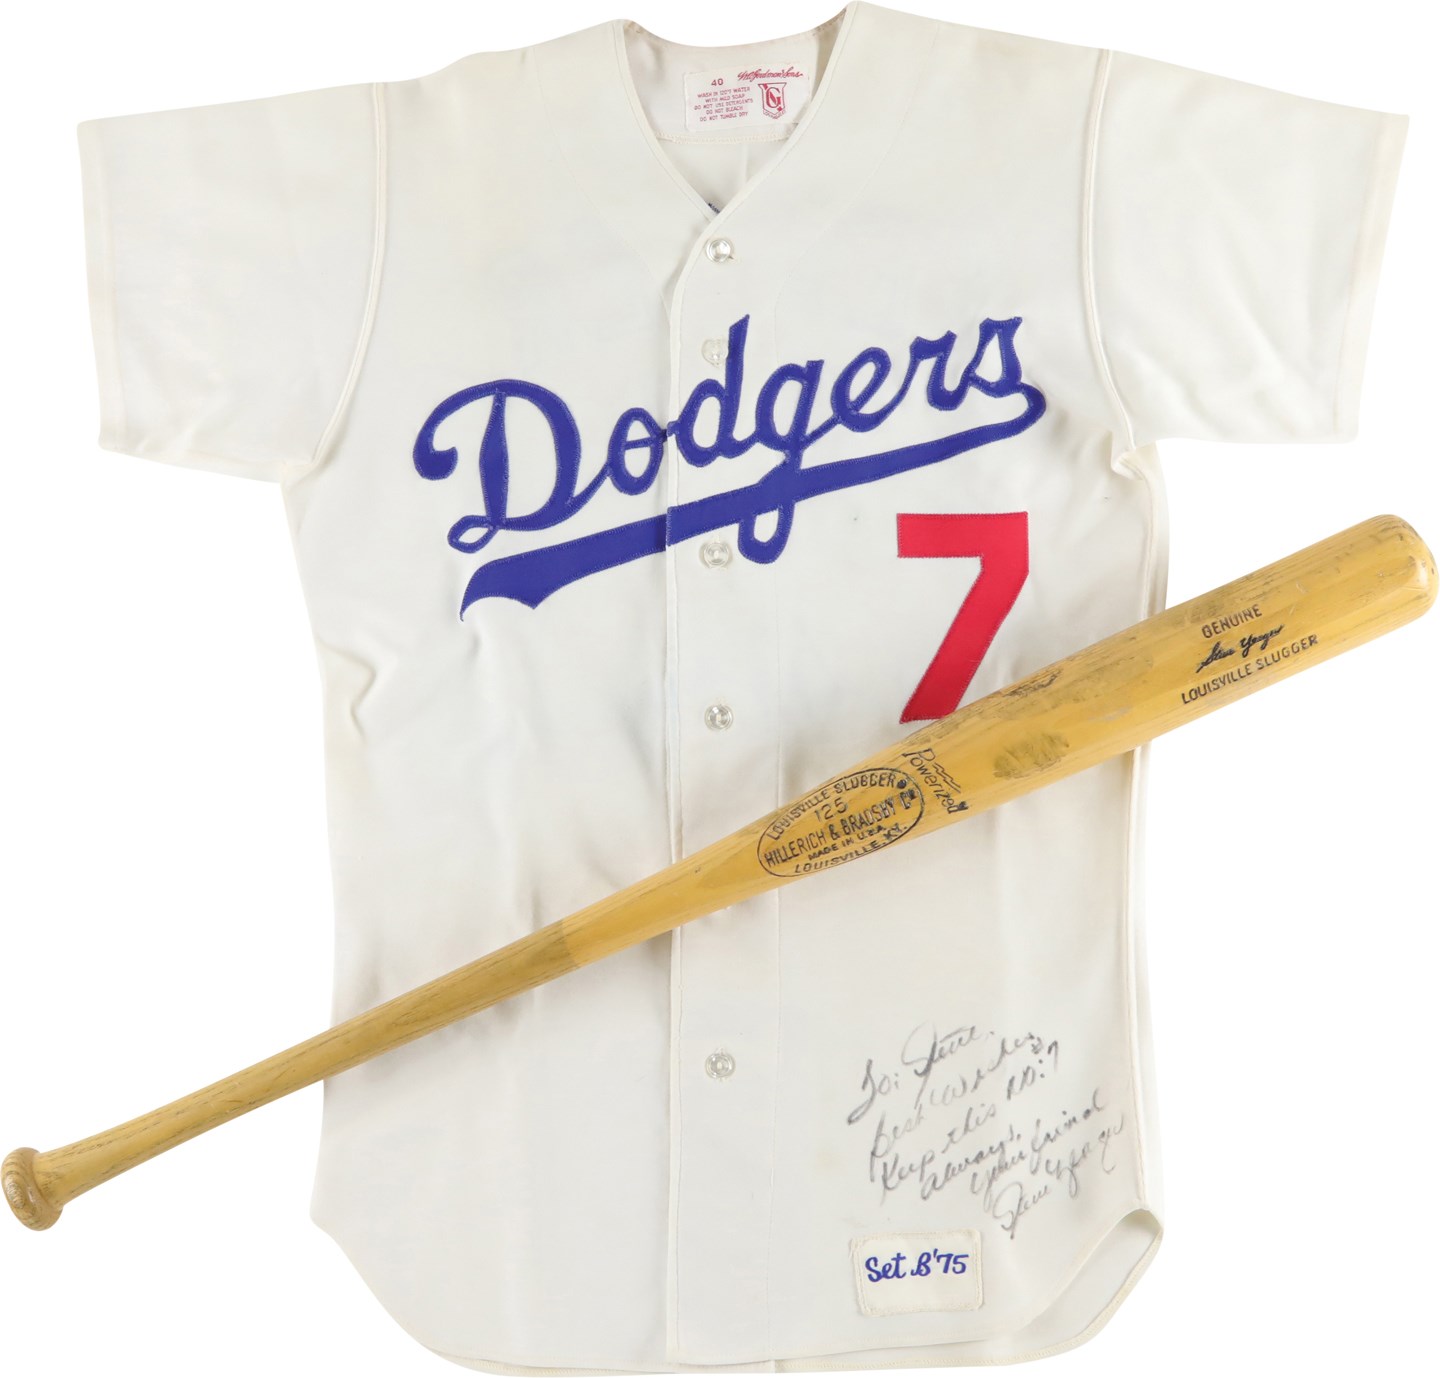 Baseball Equipment - 1975 Steve Yeager Los Angeles Dodgers Signed Game Worn Jersey and Bat